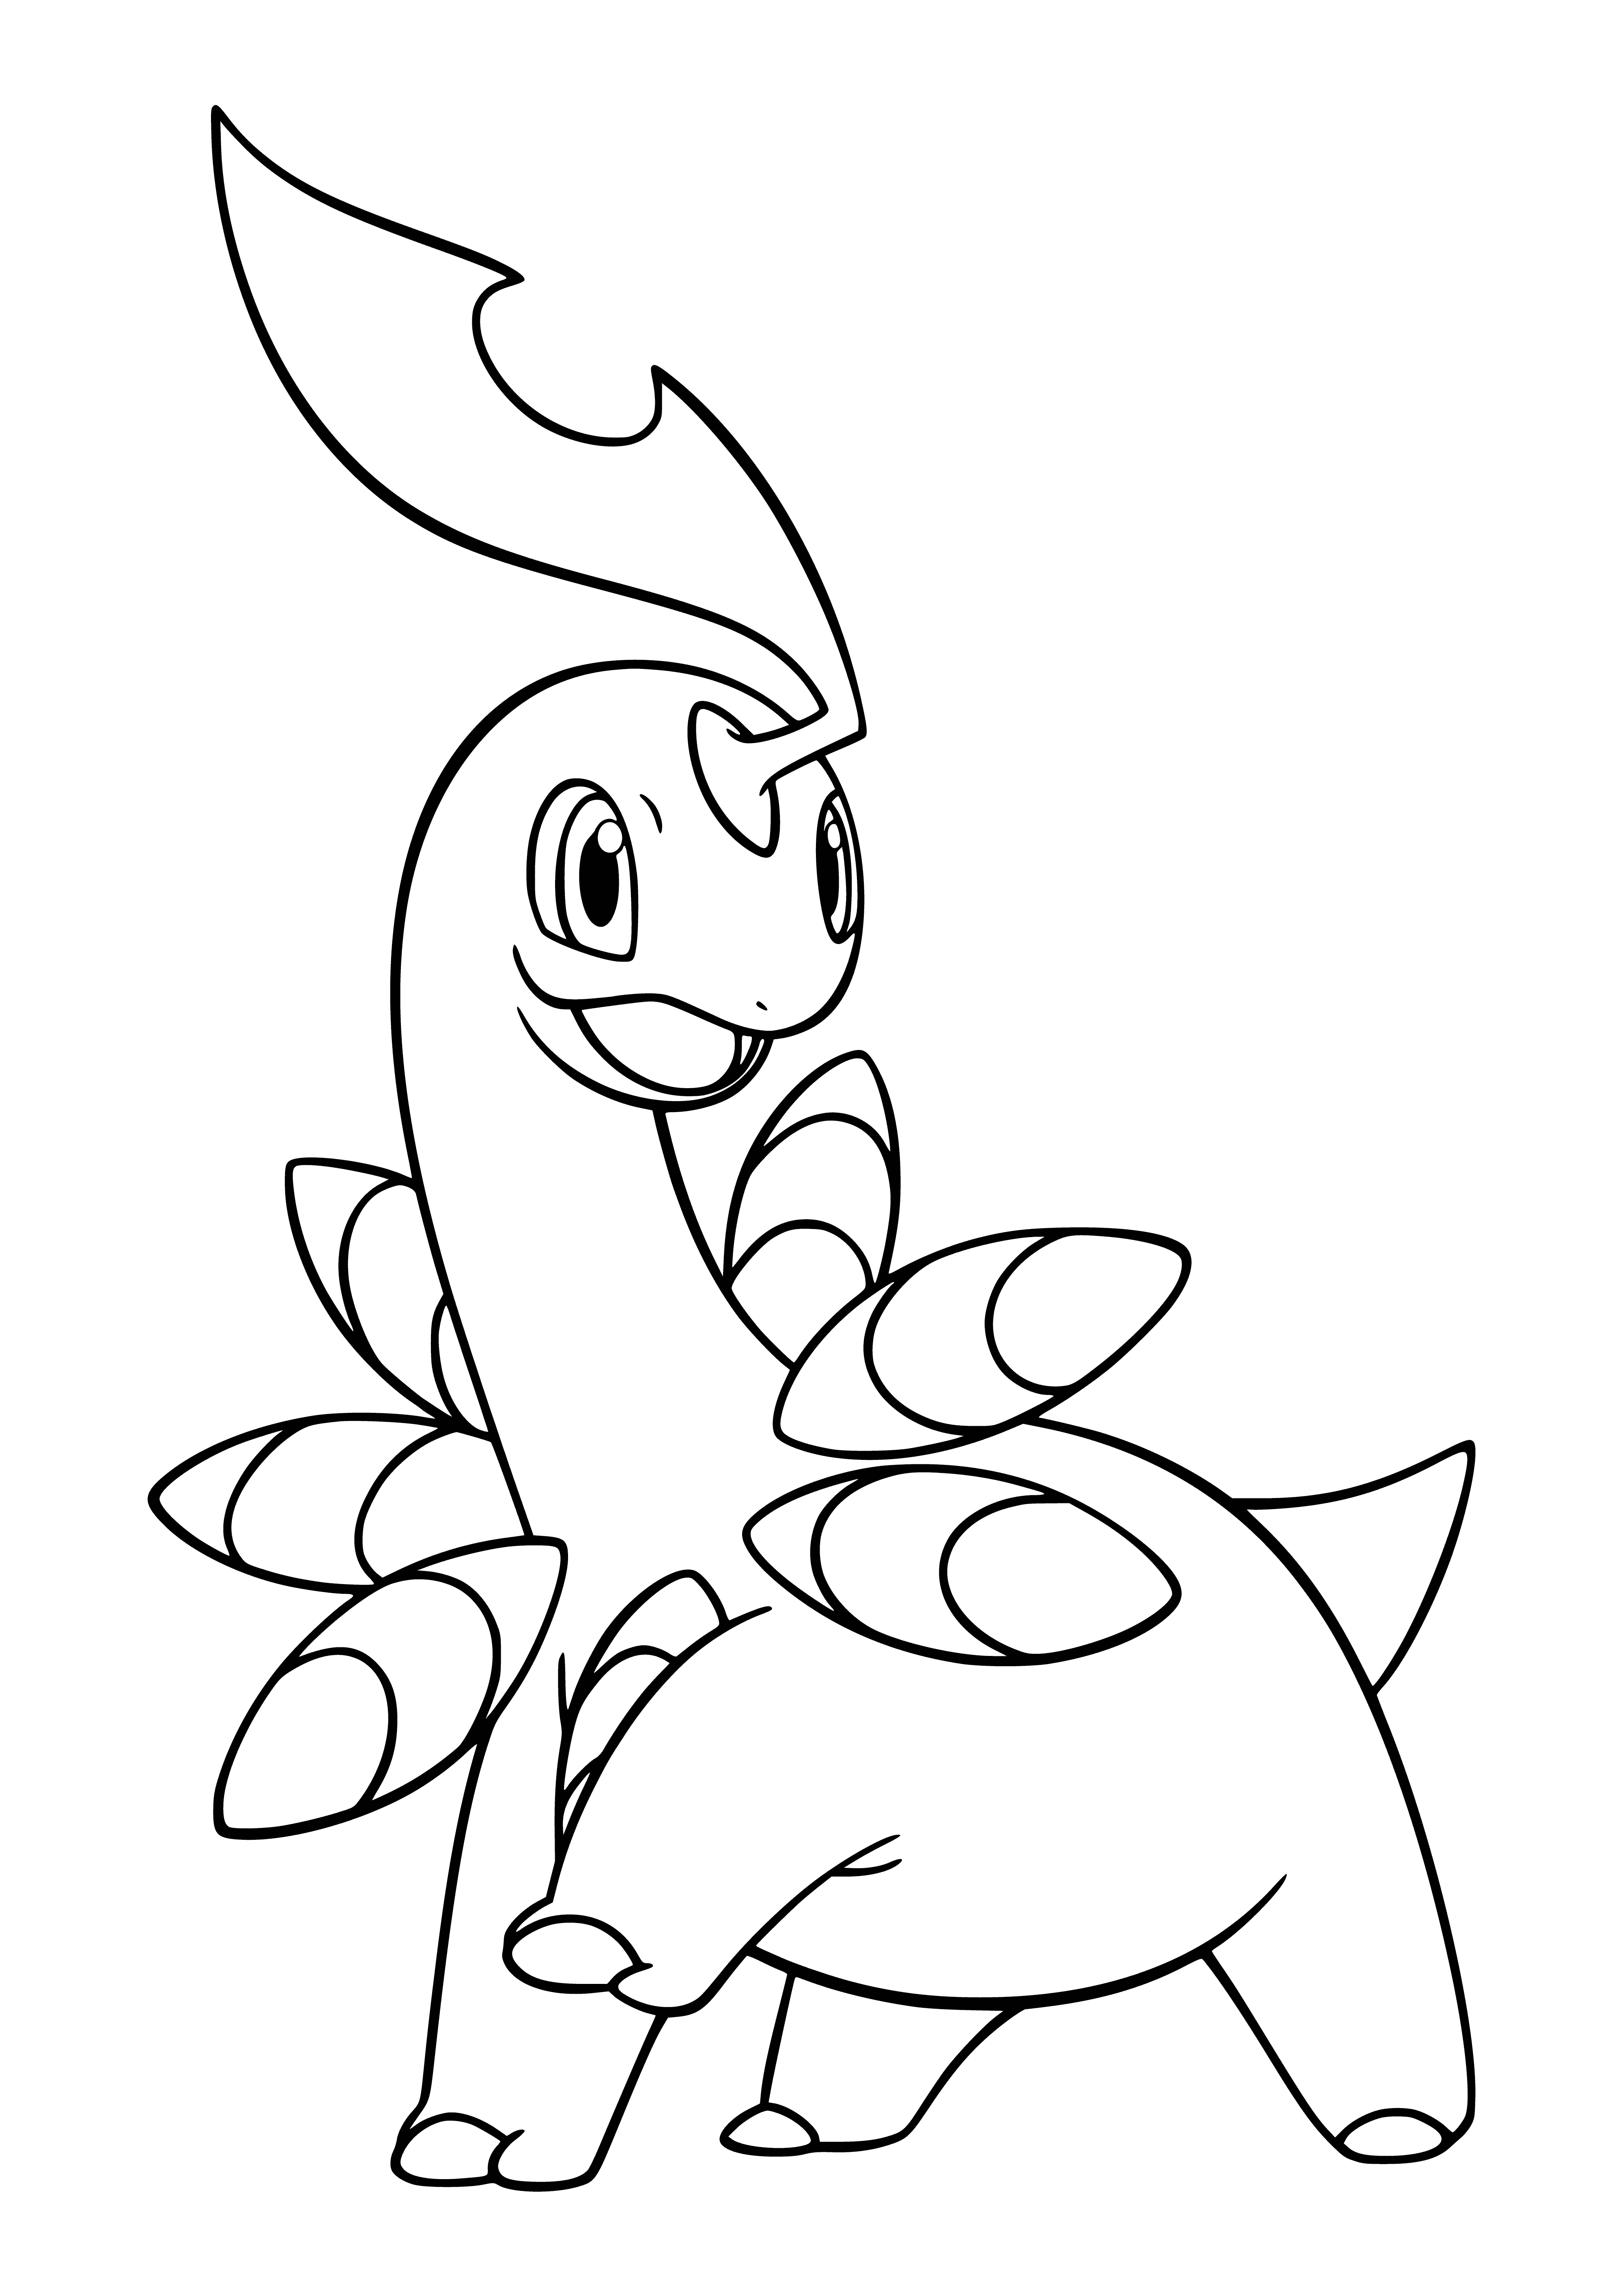 Pokemon Bayleef coloring page